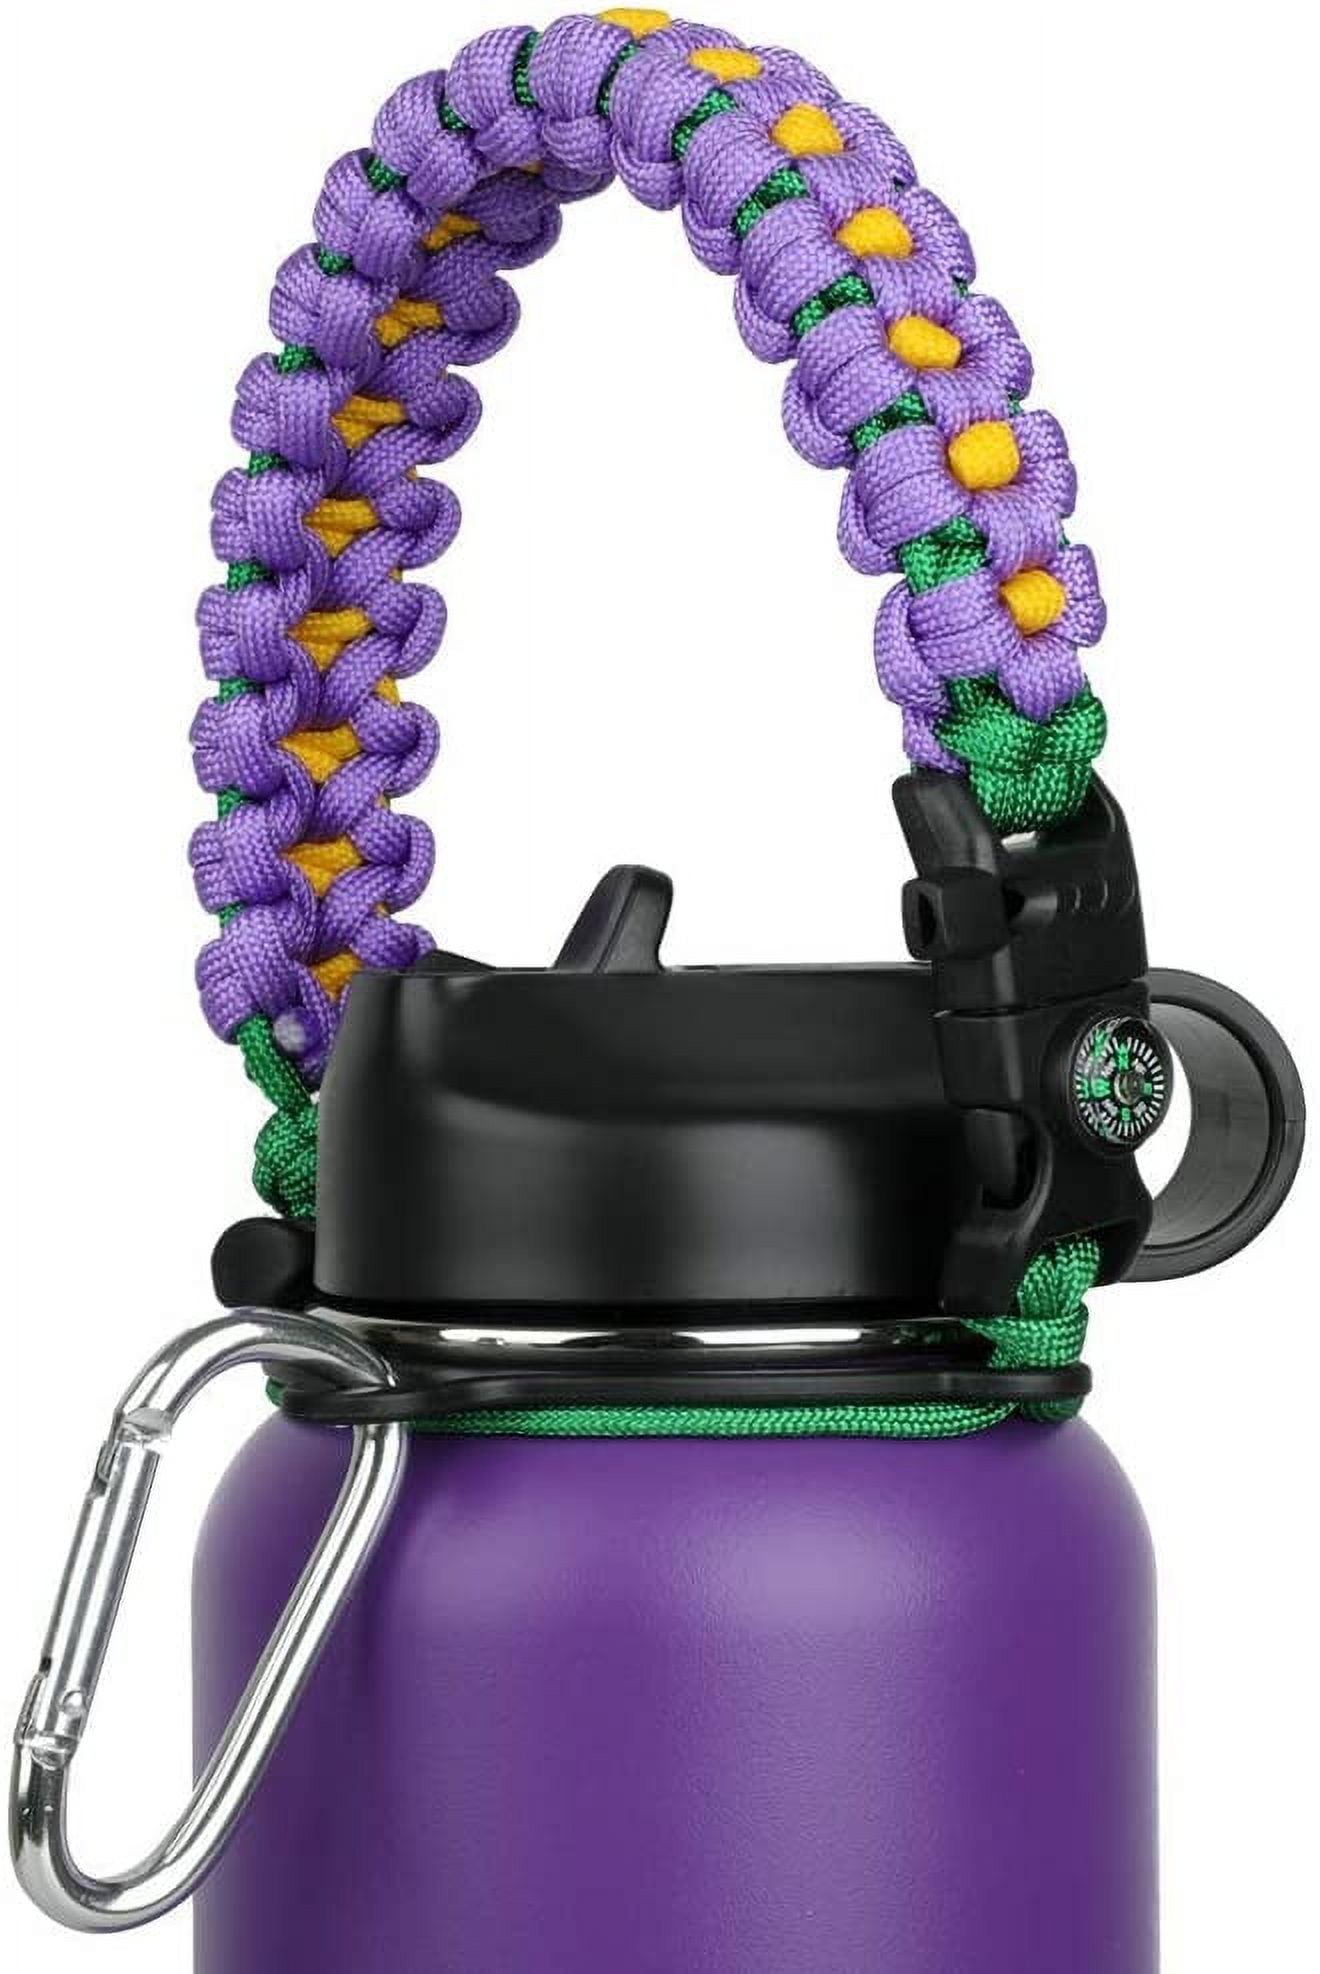  Paracord Handle for Water Bottle  Water Bottle Holder Paracord  Handle - Non-Slip Hand-Woven Water Bottle Handle Strap with Silicone Boot  Buogint : Sports & Outdoors